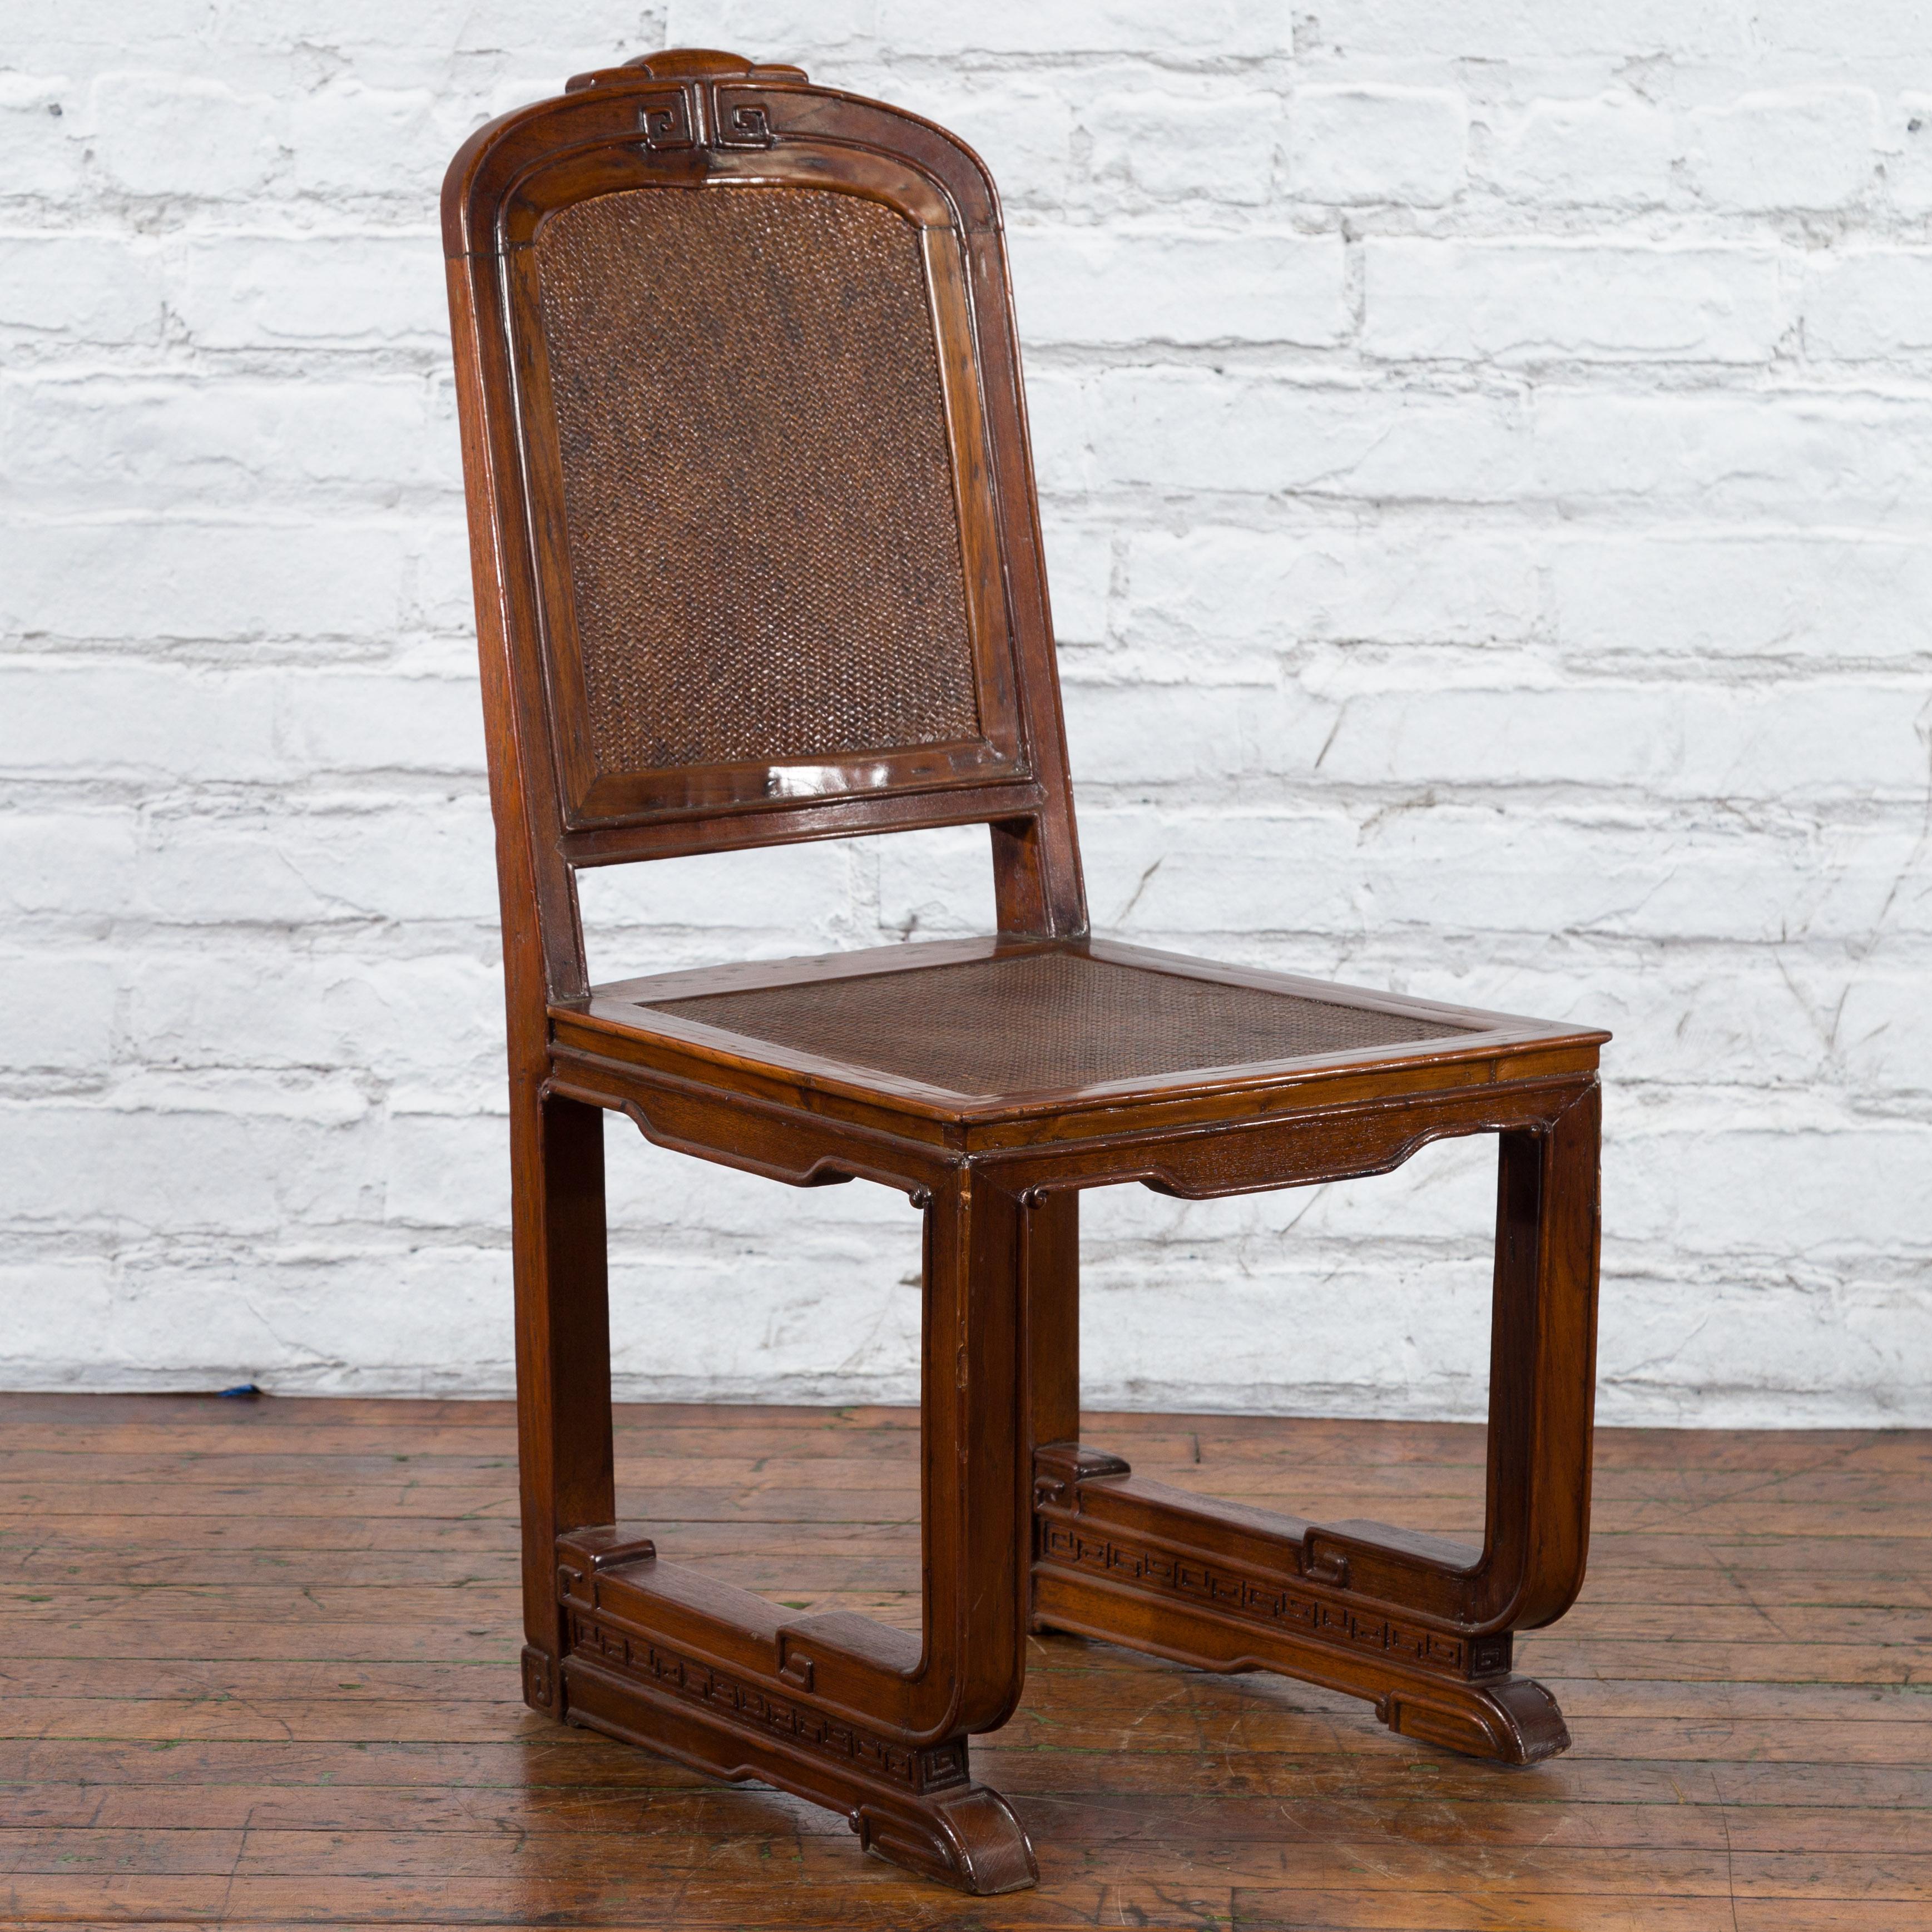 Hand-Woven Chinese Qing Dynasty Period 19th Century Wooden Side Chair with Rattan Accents For Sale